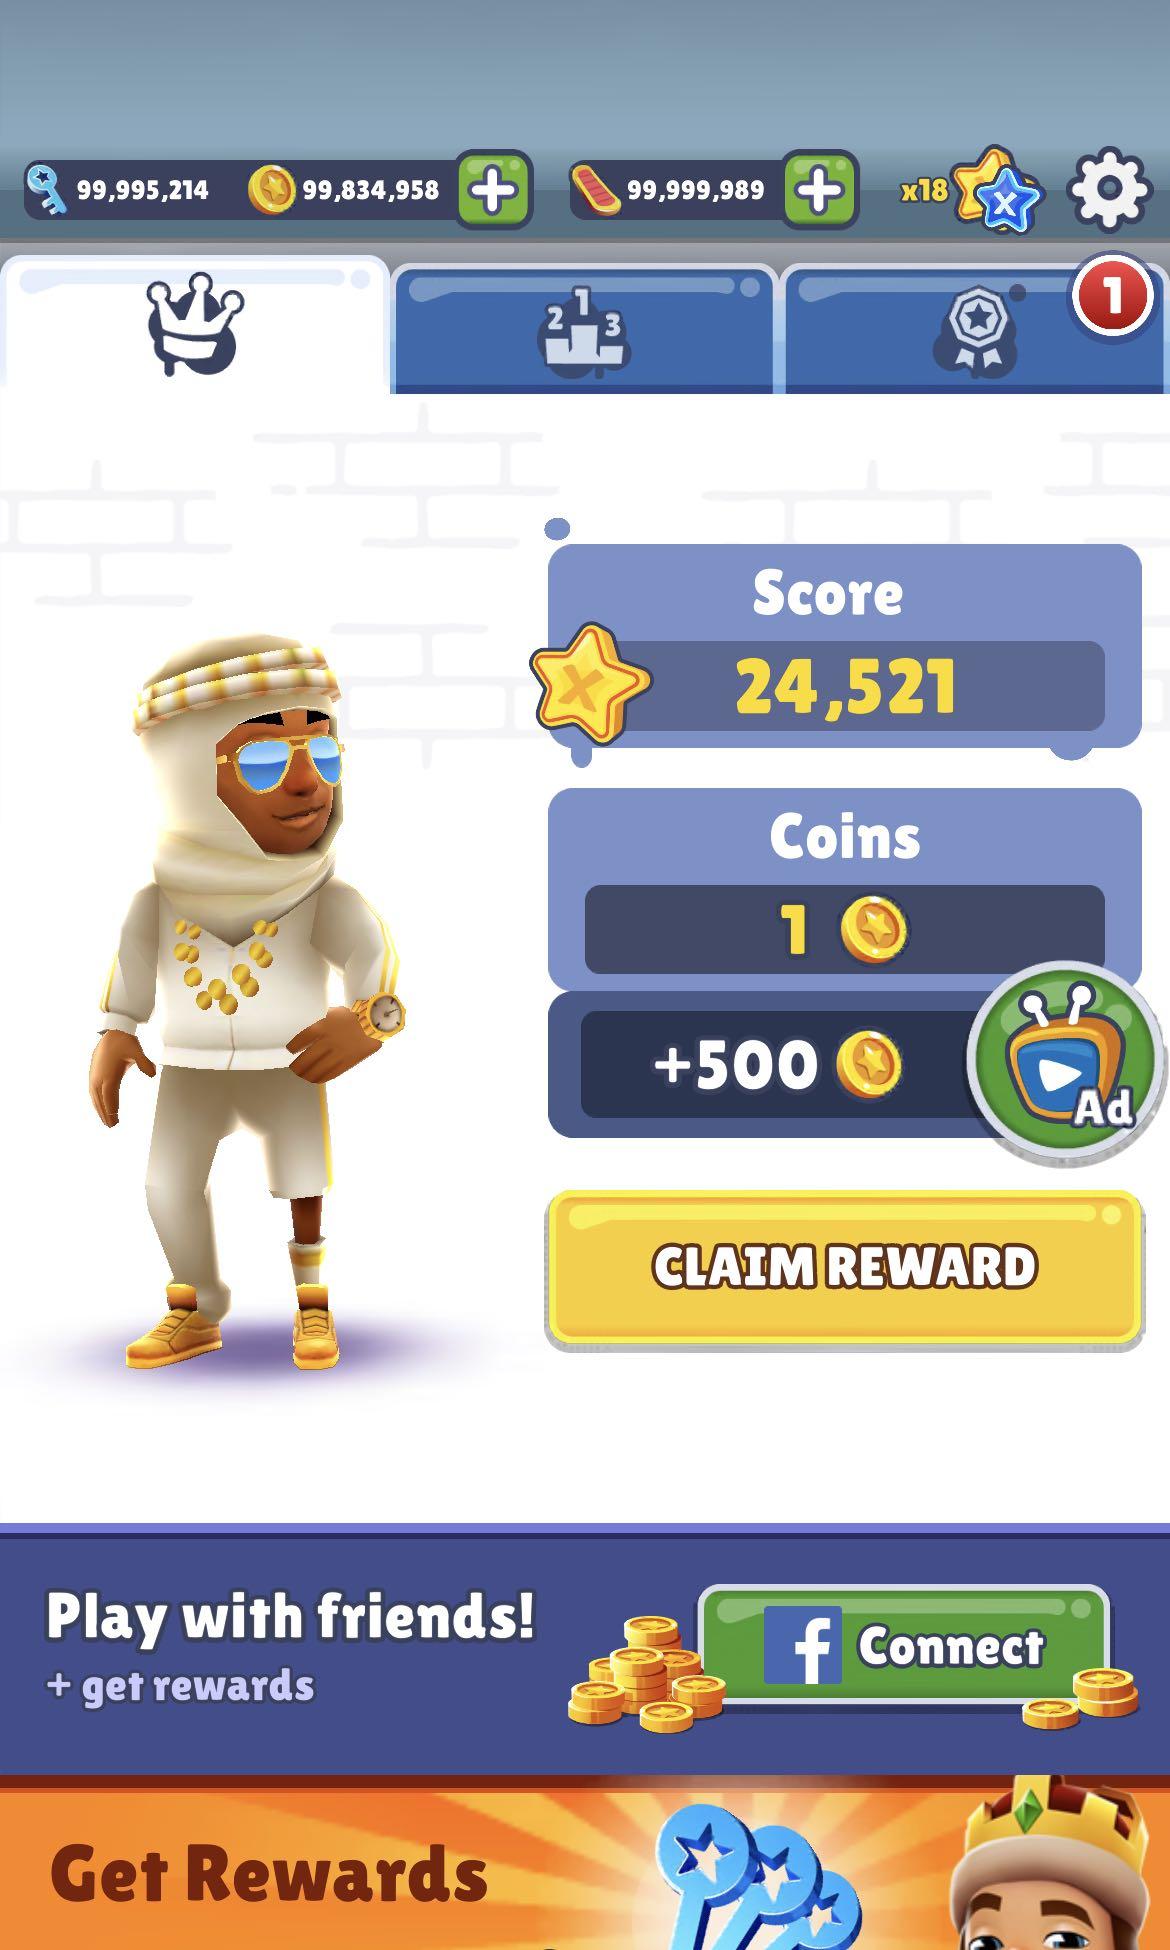 How to UNLIMITED 🪙 coins and keys in the subway surf game! 